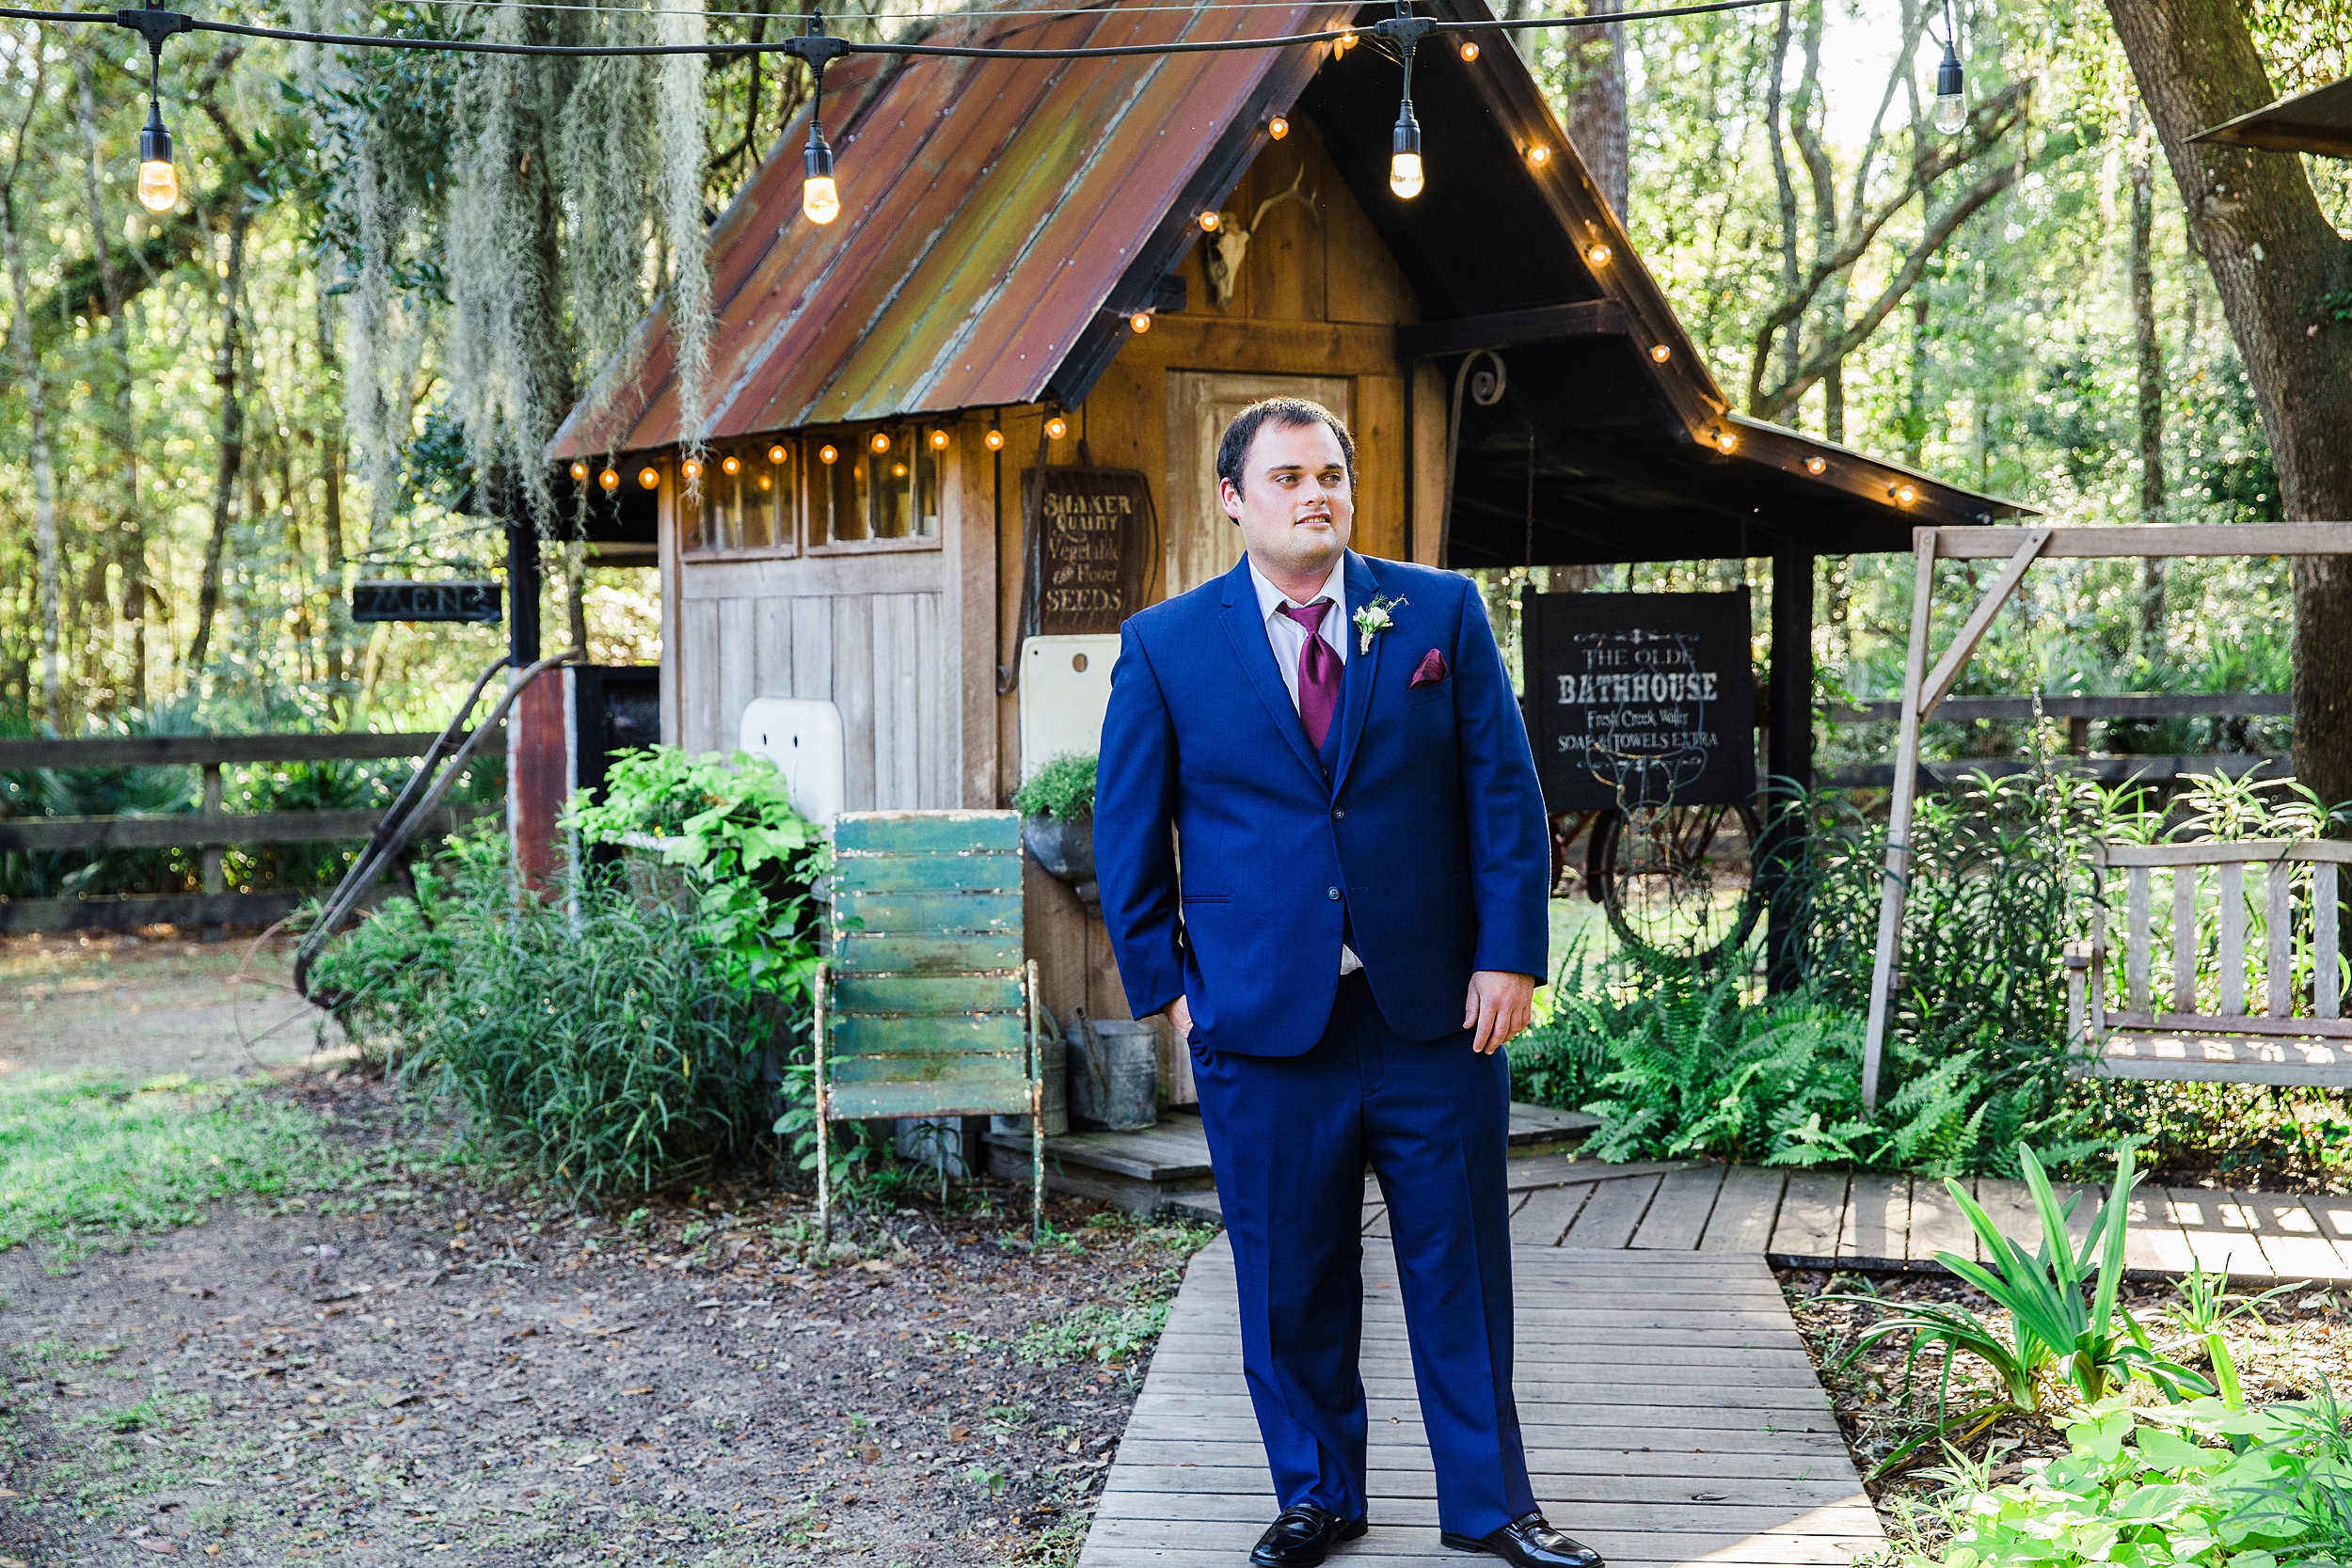 A groom stands in front of an old bathhouse under an oak canopy in a blue suit and maroon details